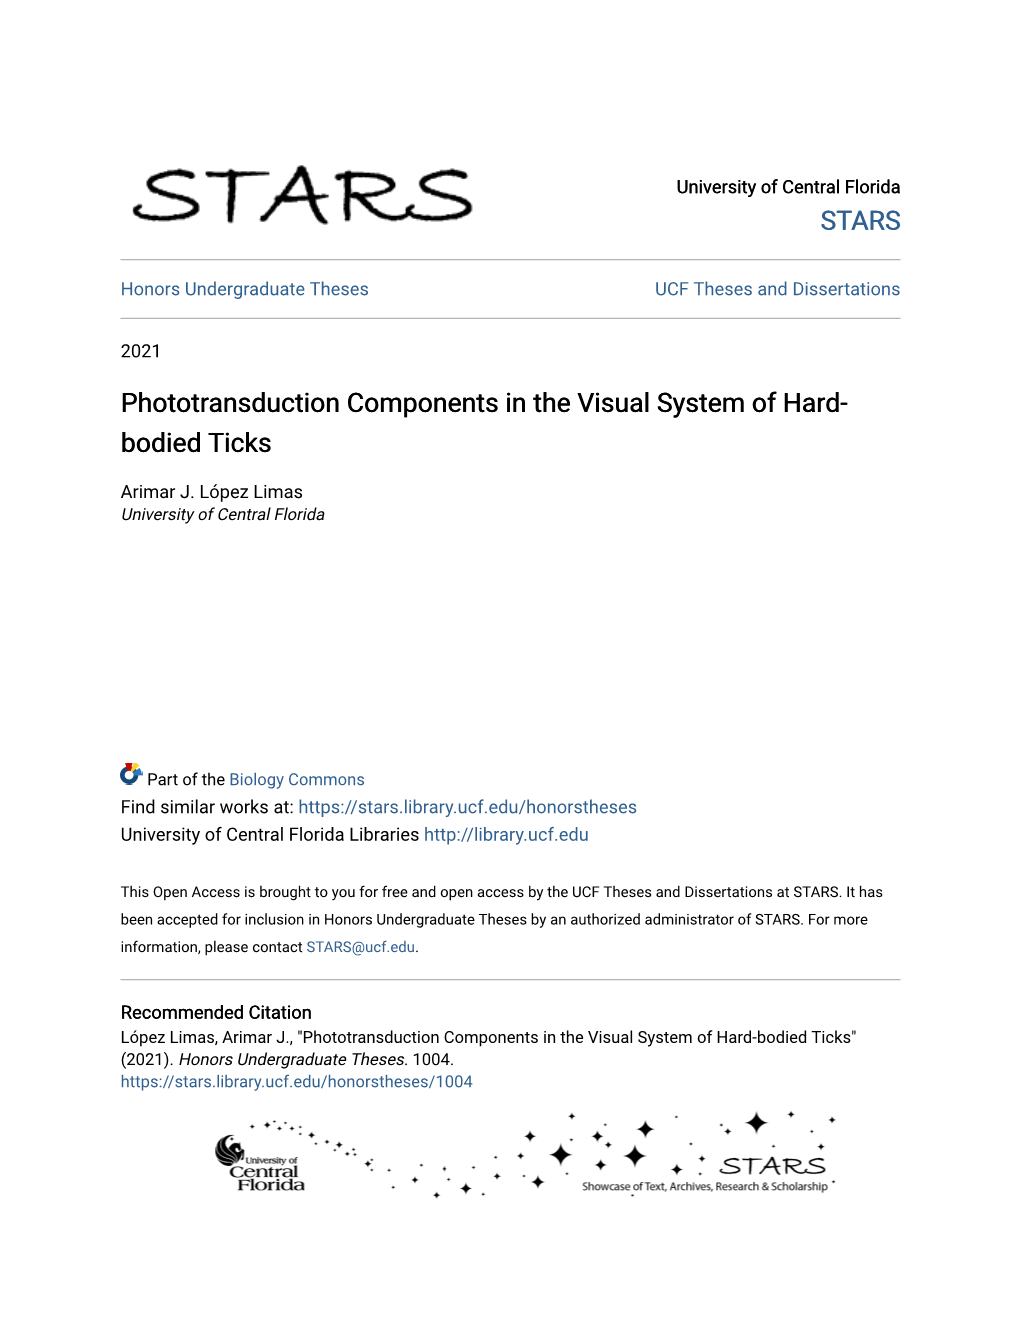 Phototransduction Components in the Visual System of Hard-Bodied Ticks" (2021)